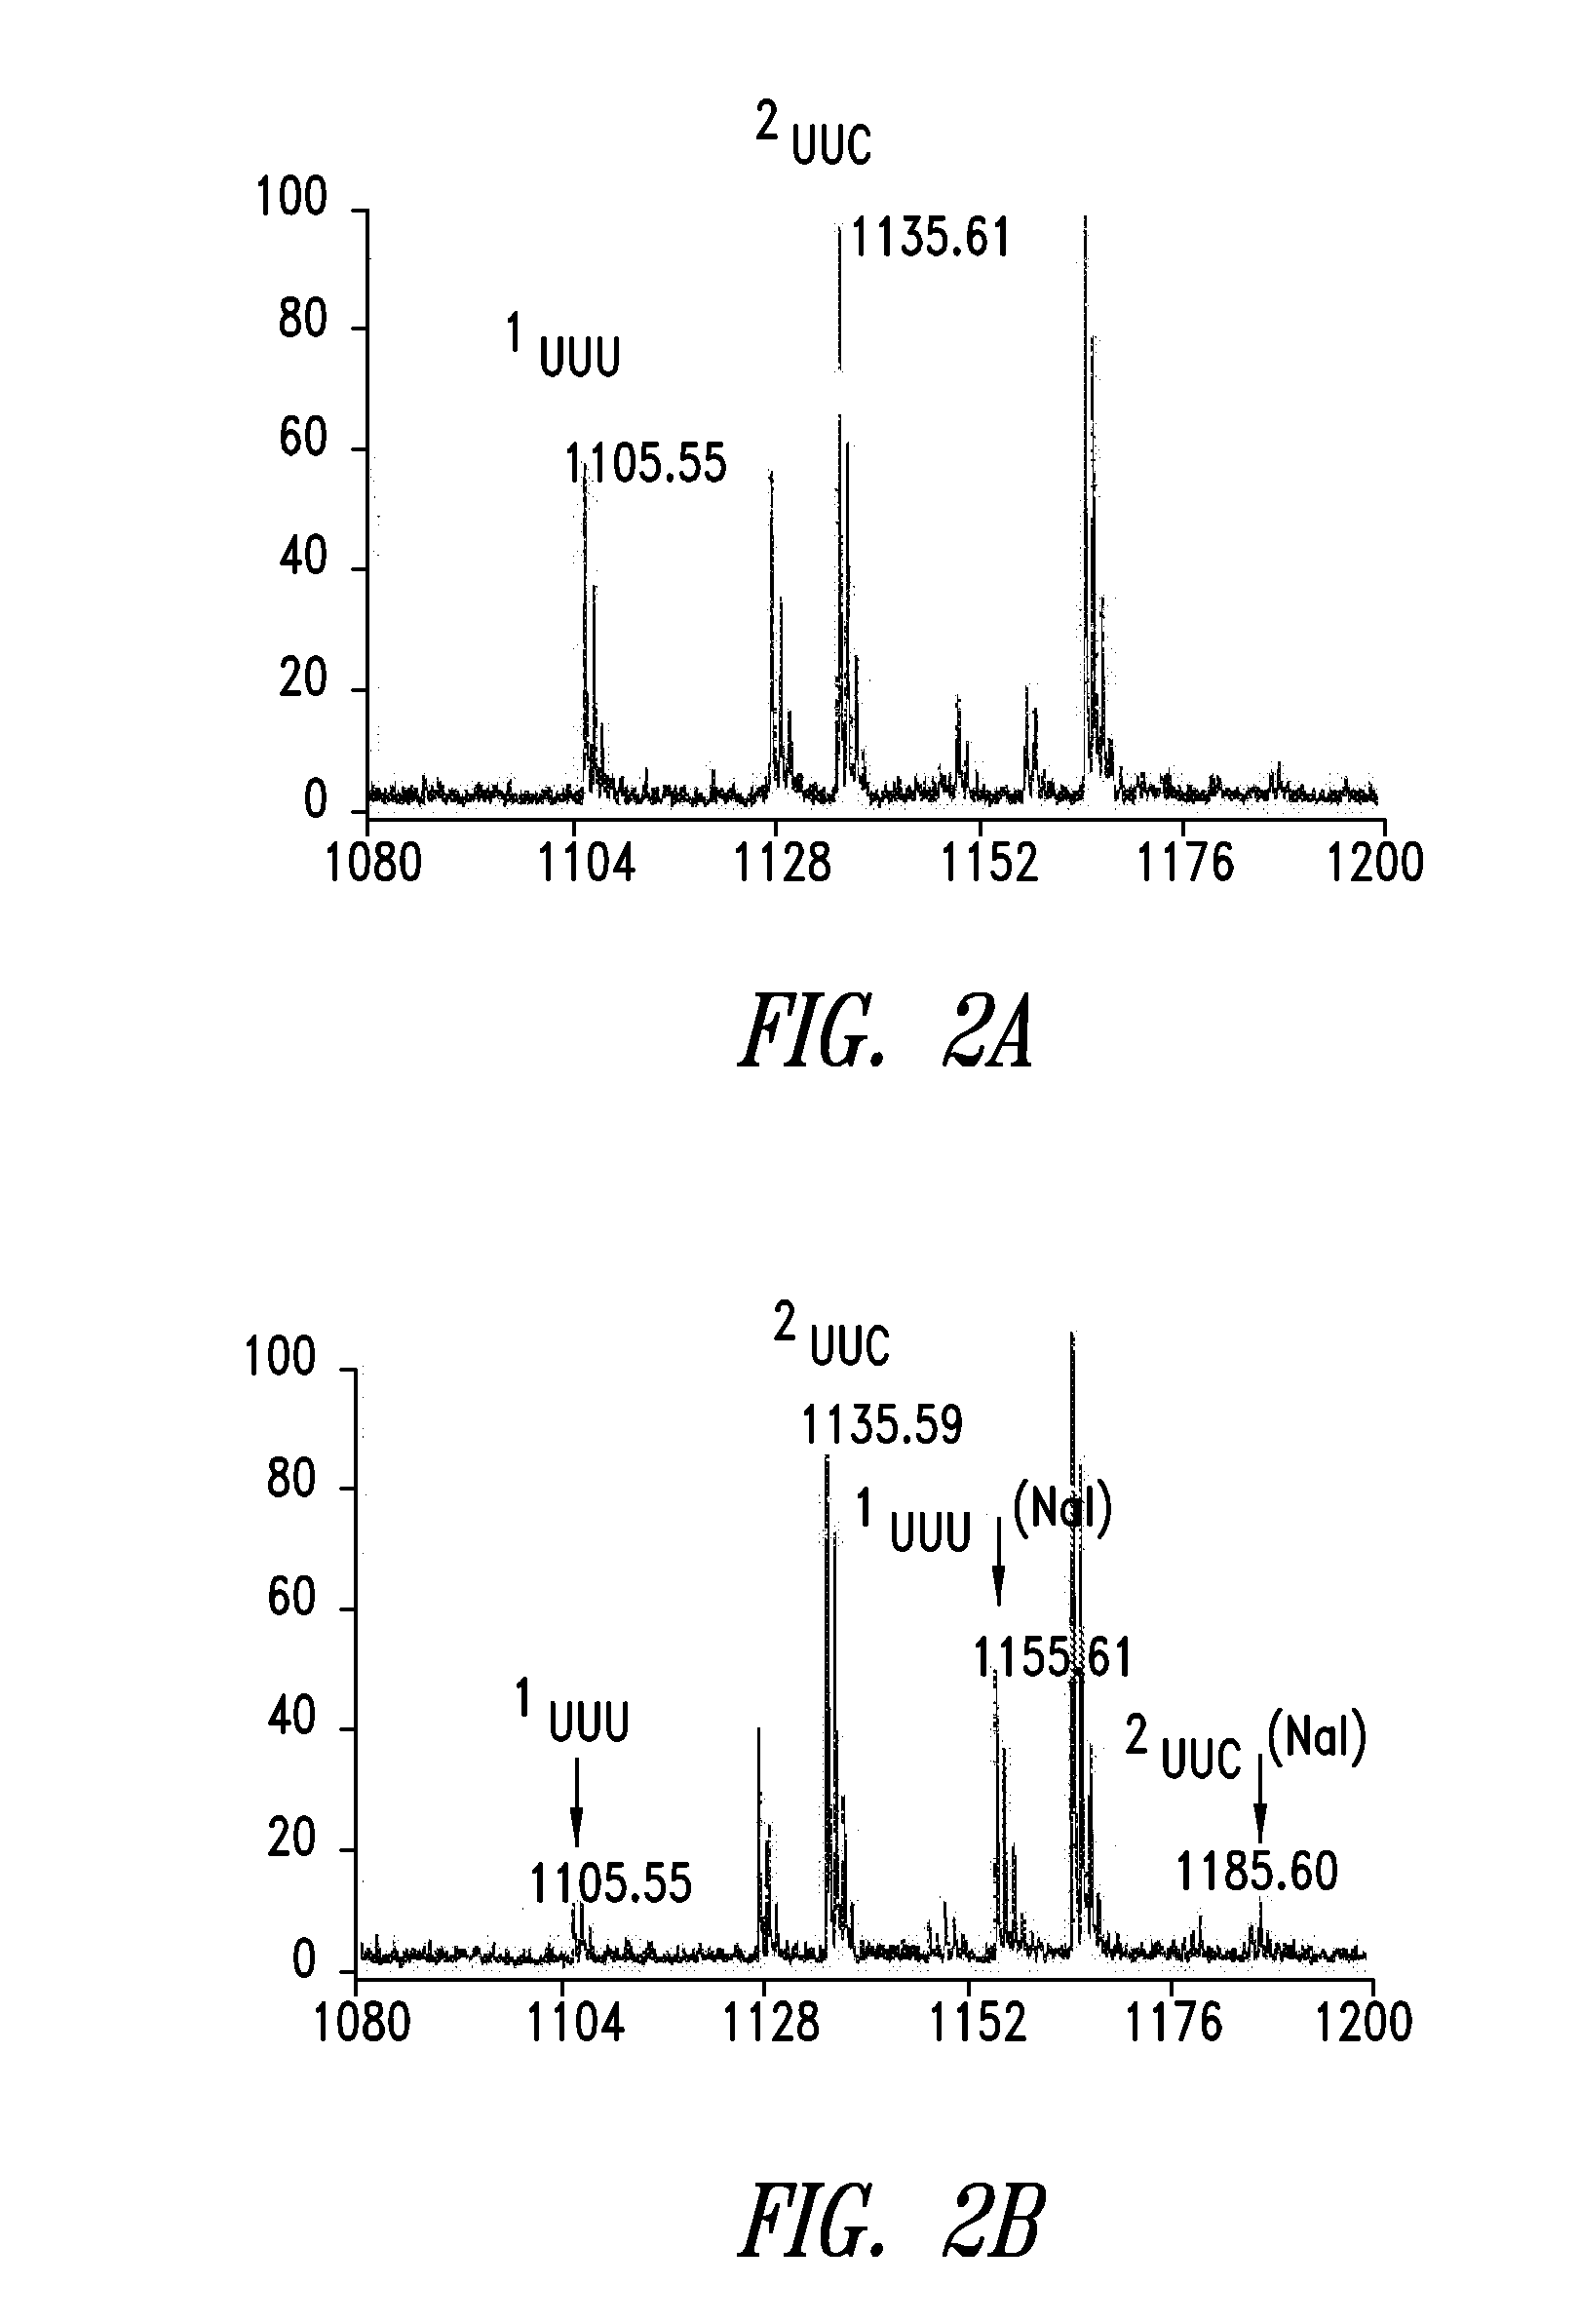 Methods of incorporating amino acid analogs into proteins